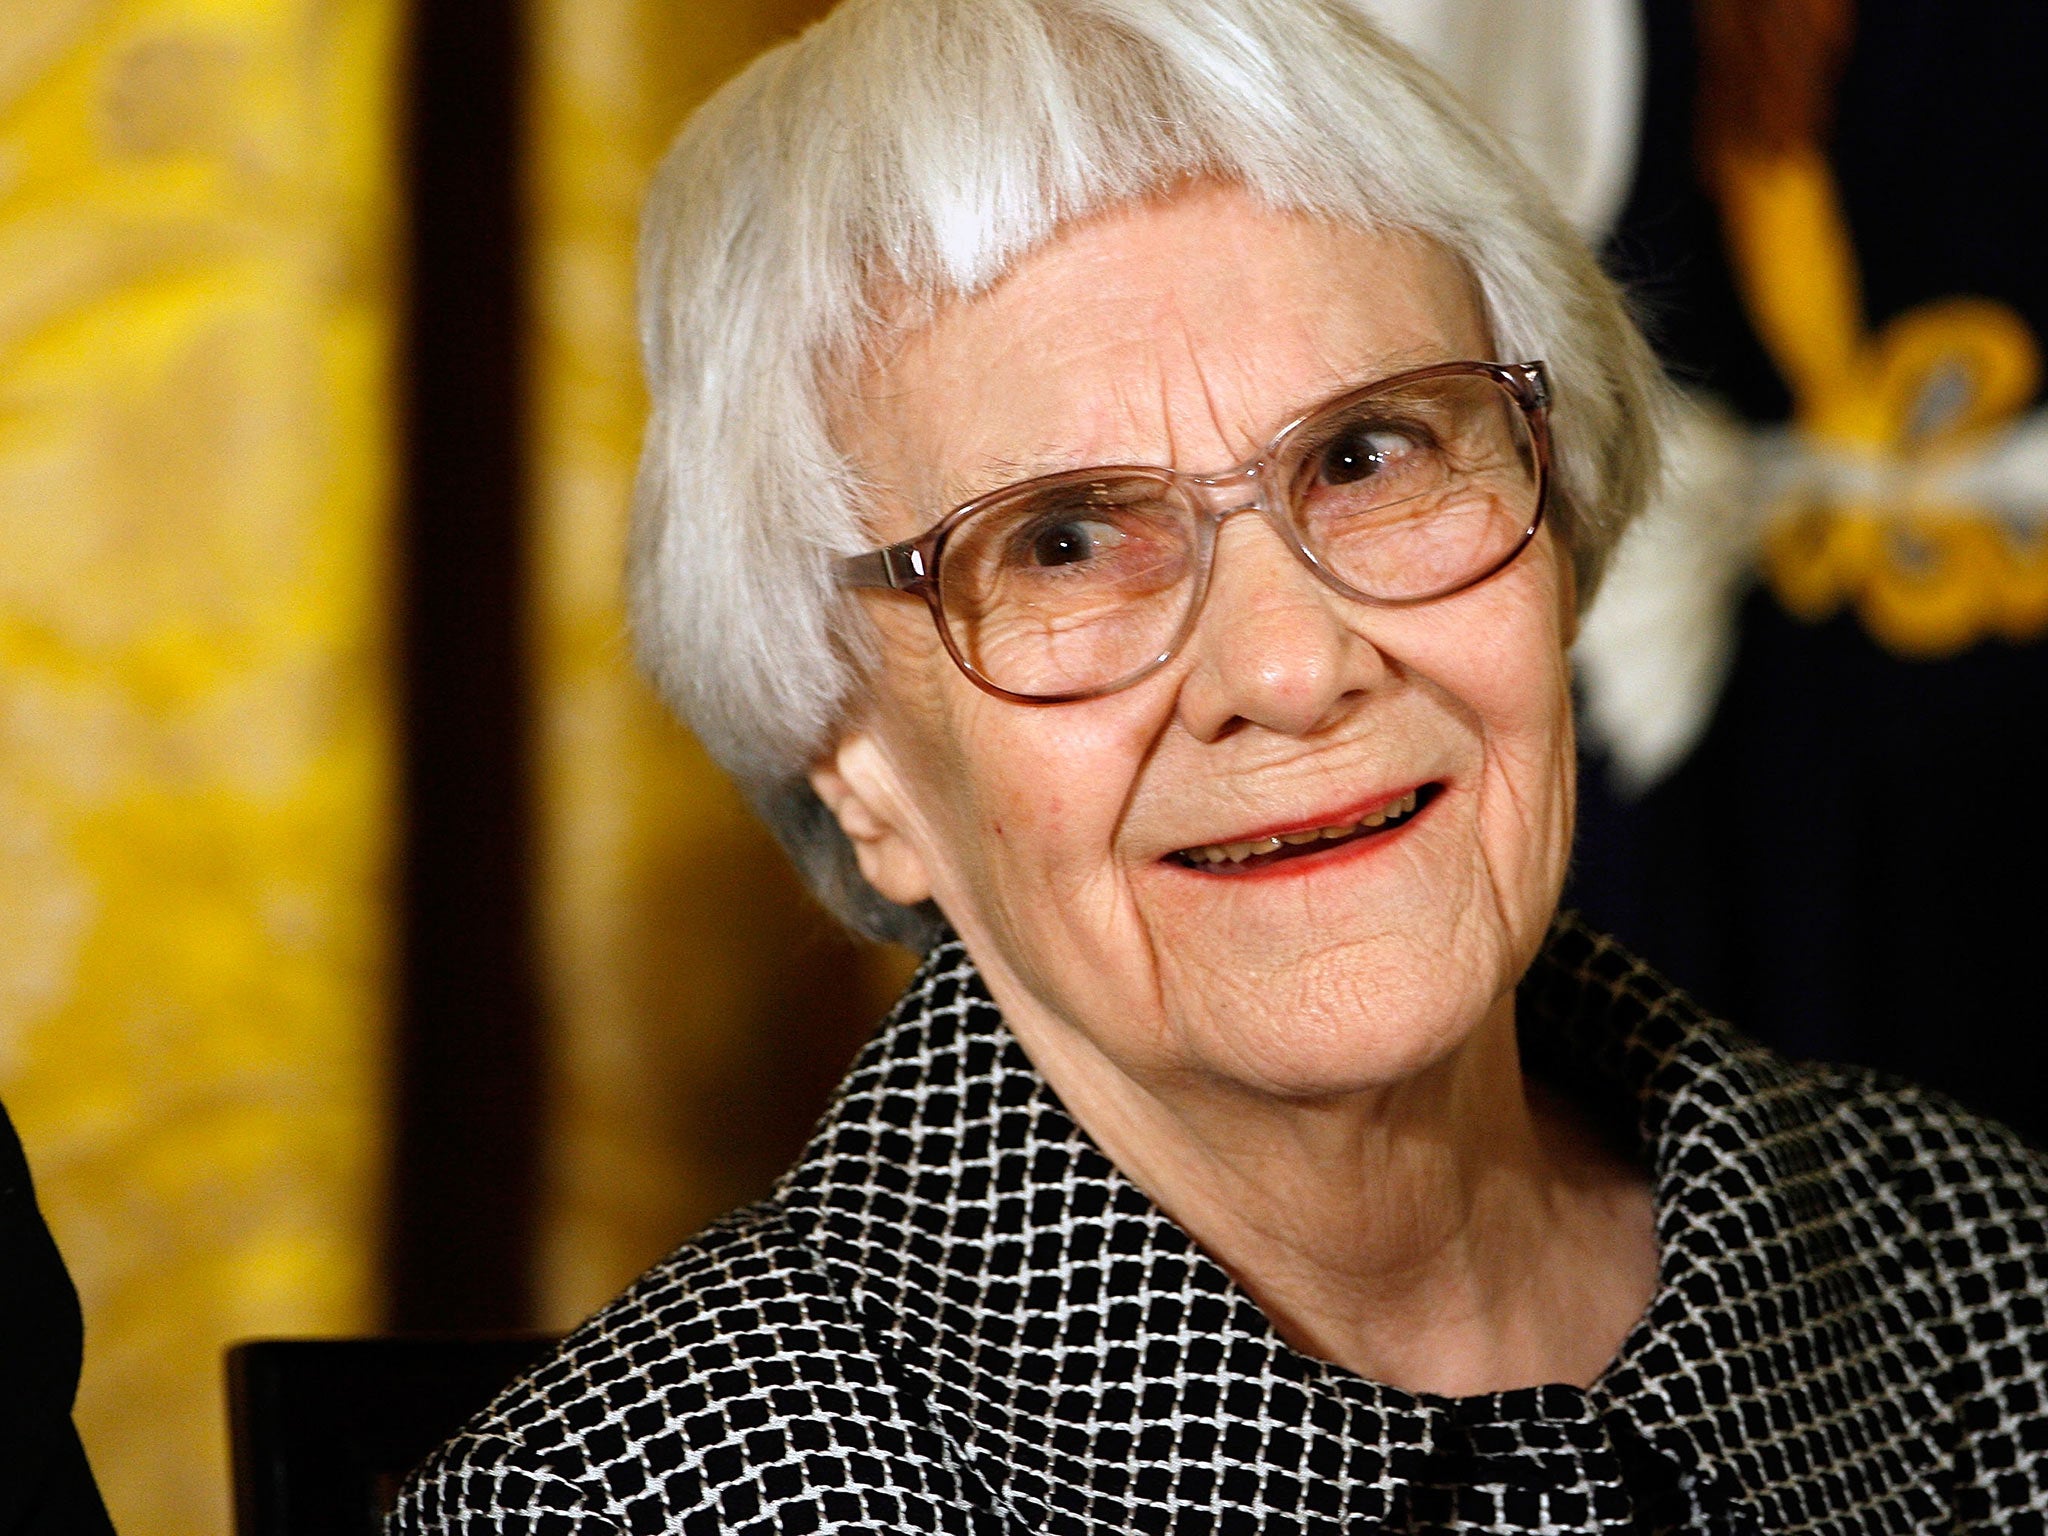 Harper Lee’s ‘To Kill a Mockingbird’ has sold in excess of 30 million copies